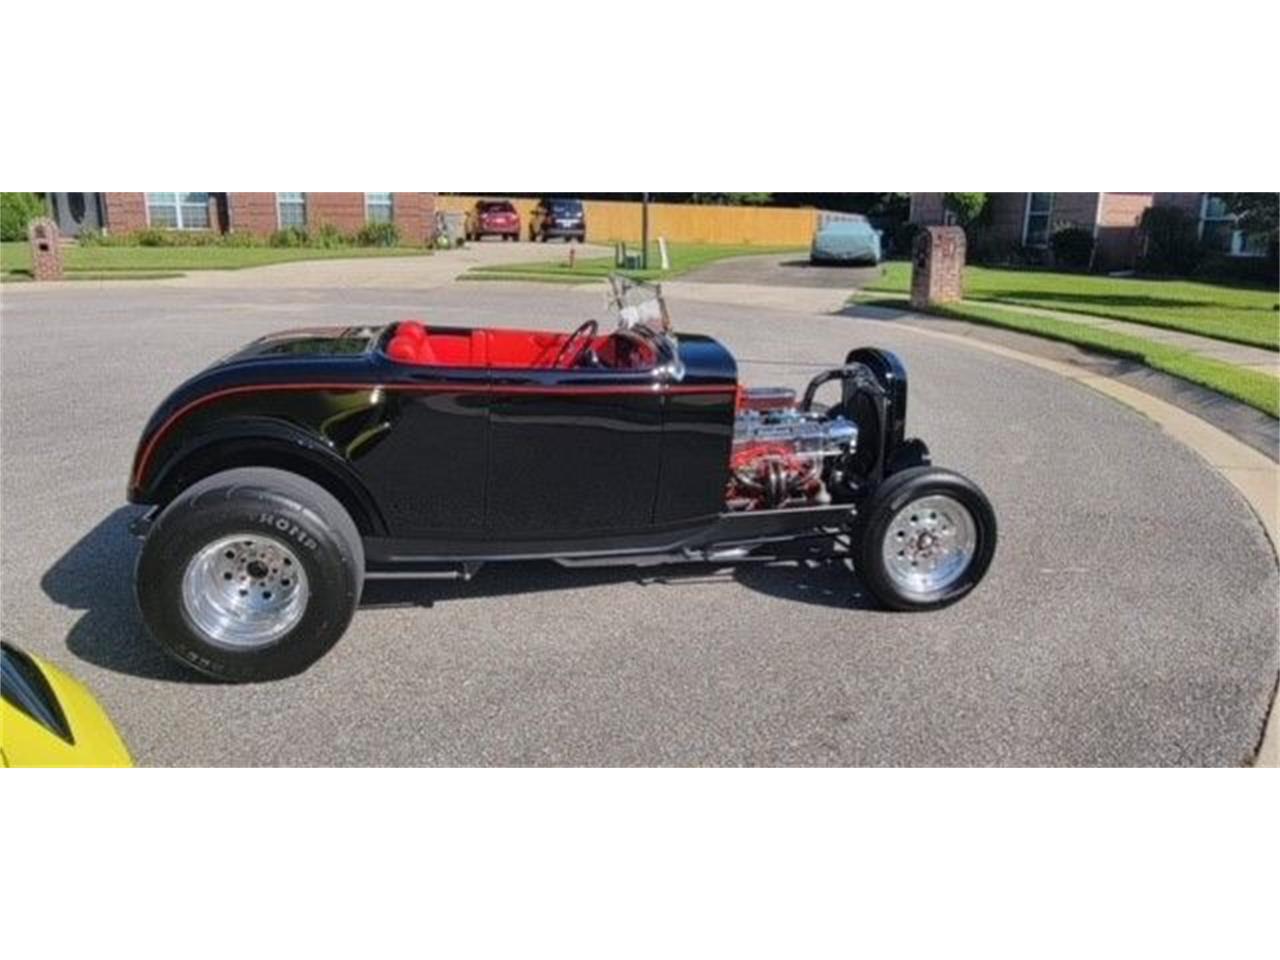 For Sale: 1932 Ford Roadster in Cadillac, Michigan for sale in Cadillac, MI